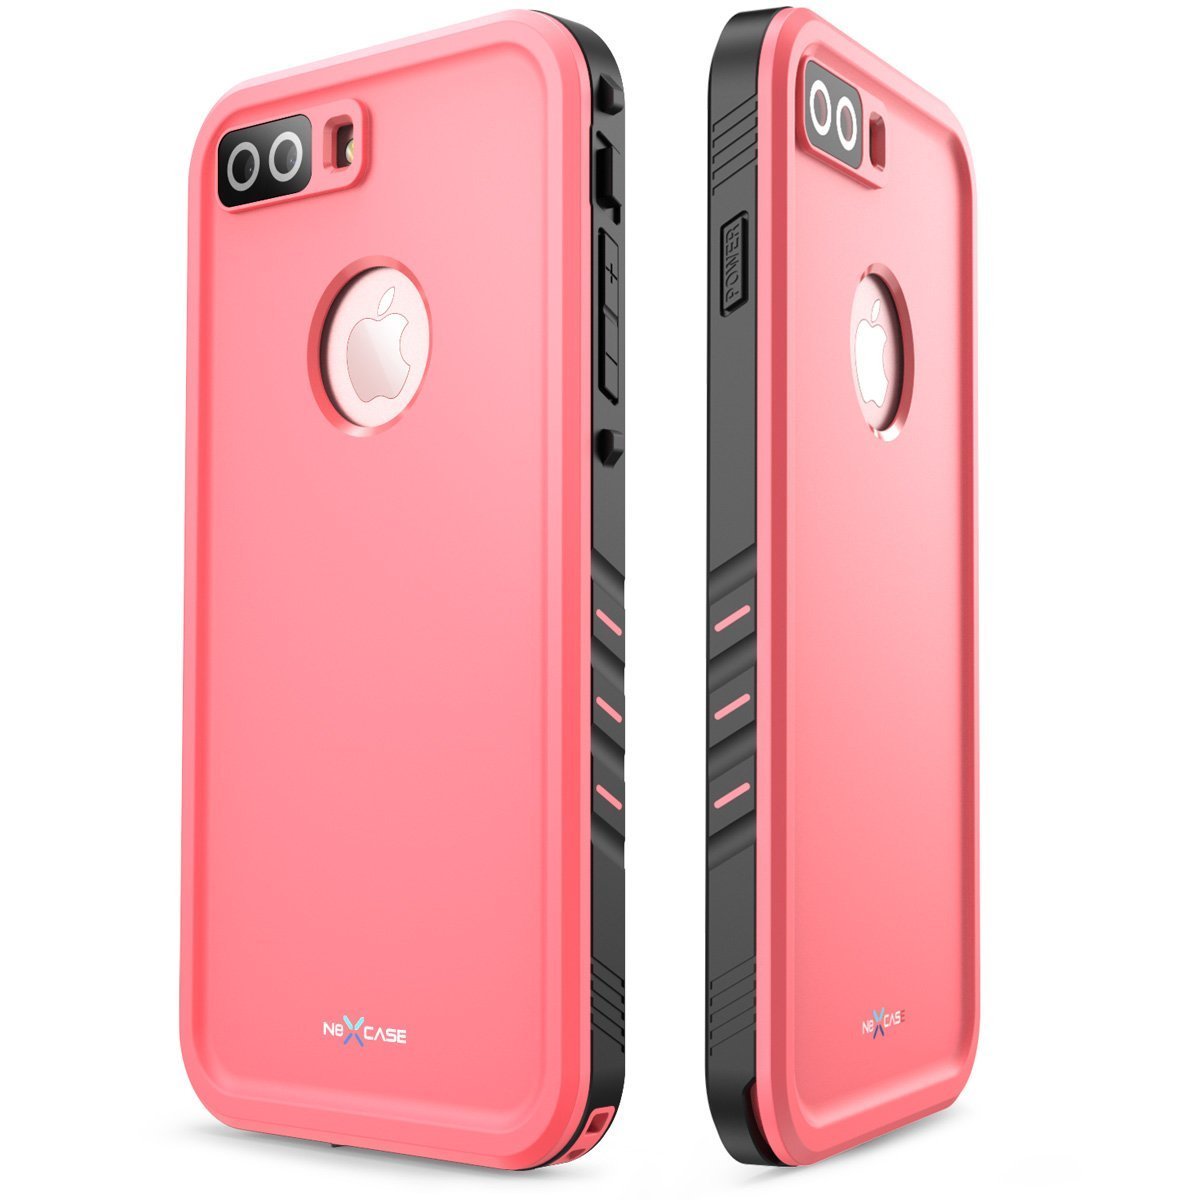 iPhone 7 Plus Case, NexCase Waterproof Full-body Rugged Case with Built-in Screen Protector for Apple iPhone 7 Plus 5.5 inch 2016 Release (Pink)